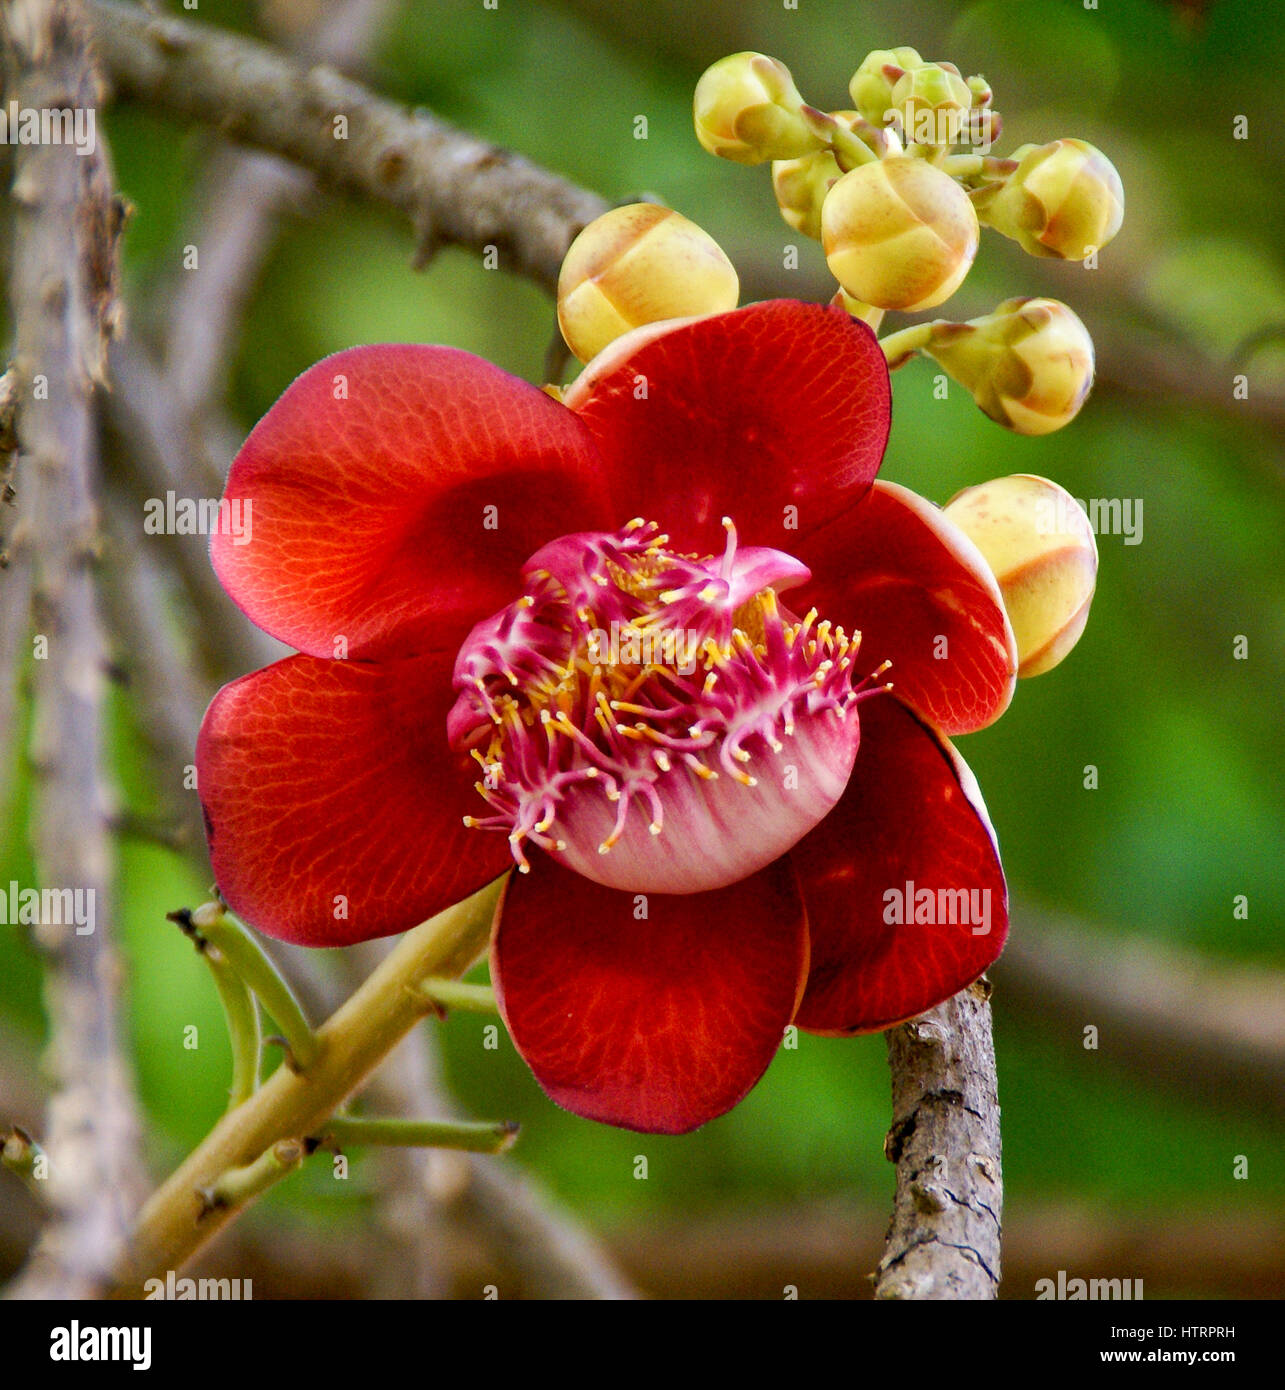 The unique red flower of the Cannonball tree - Cambodia. The tree is sacred to Hindus, who believe its hooded flowers look like the nāga. Stock Photo